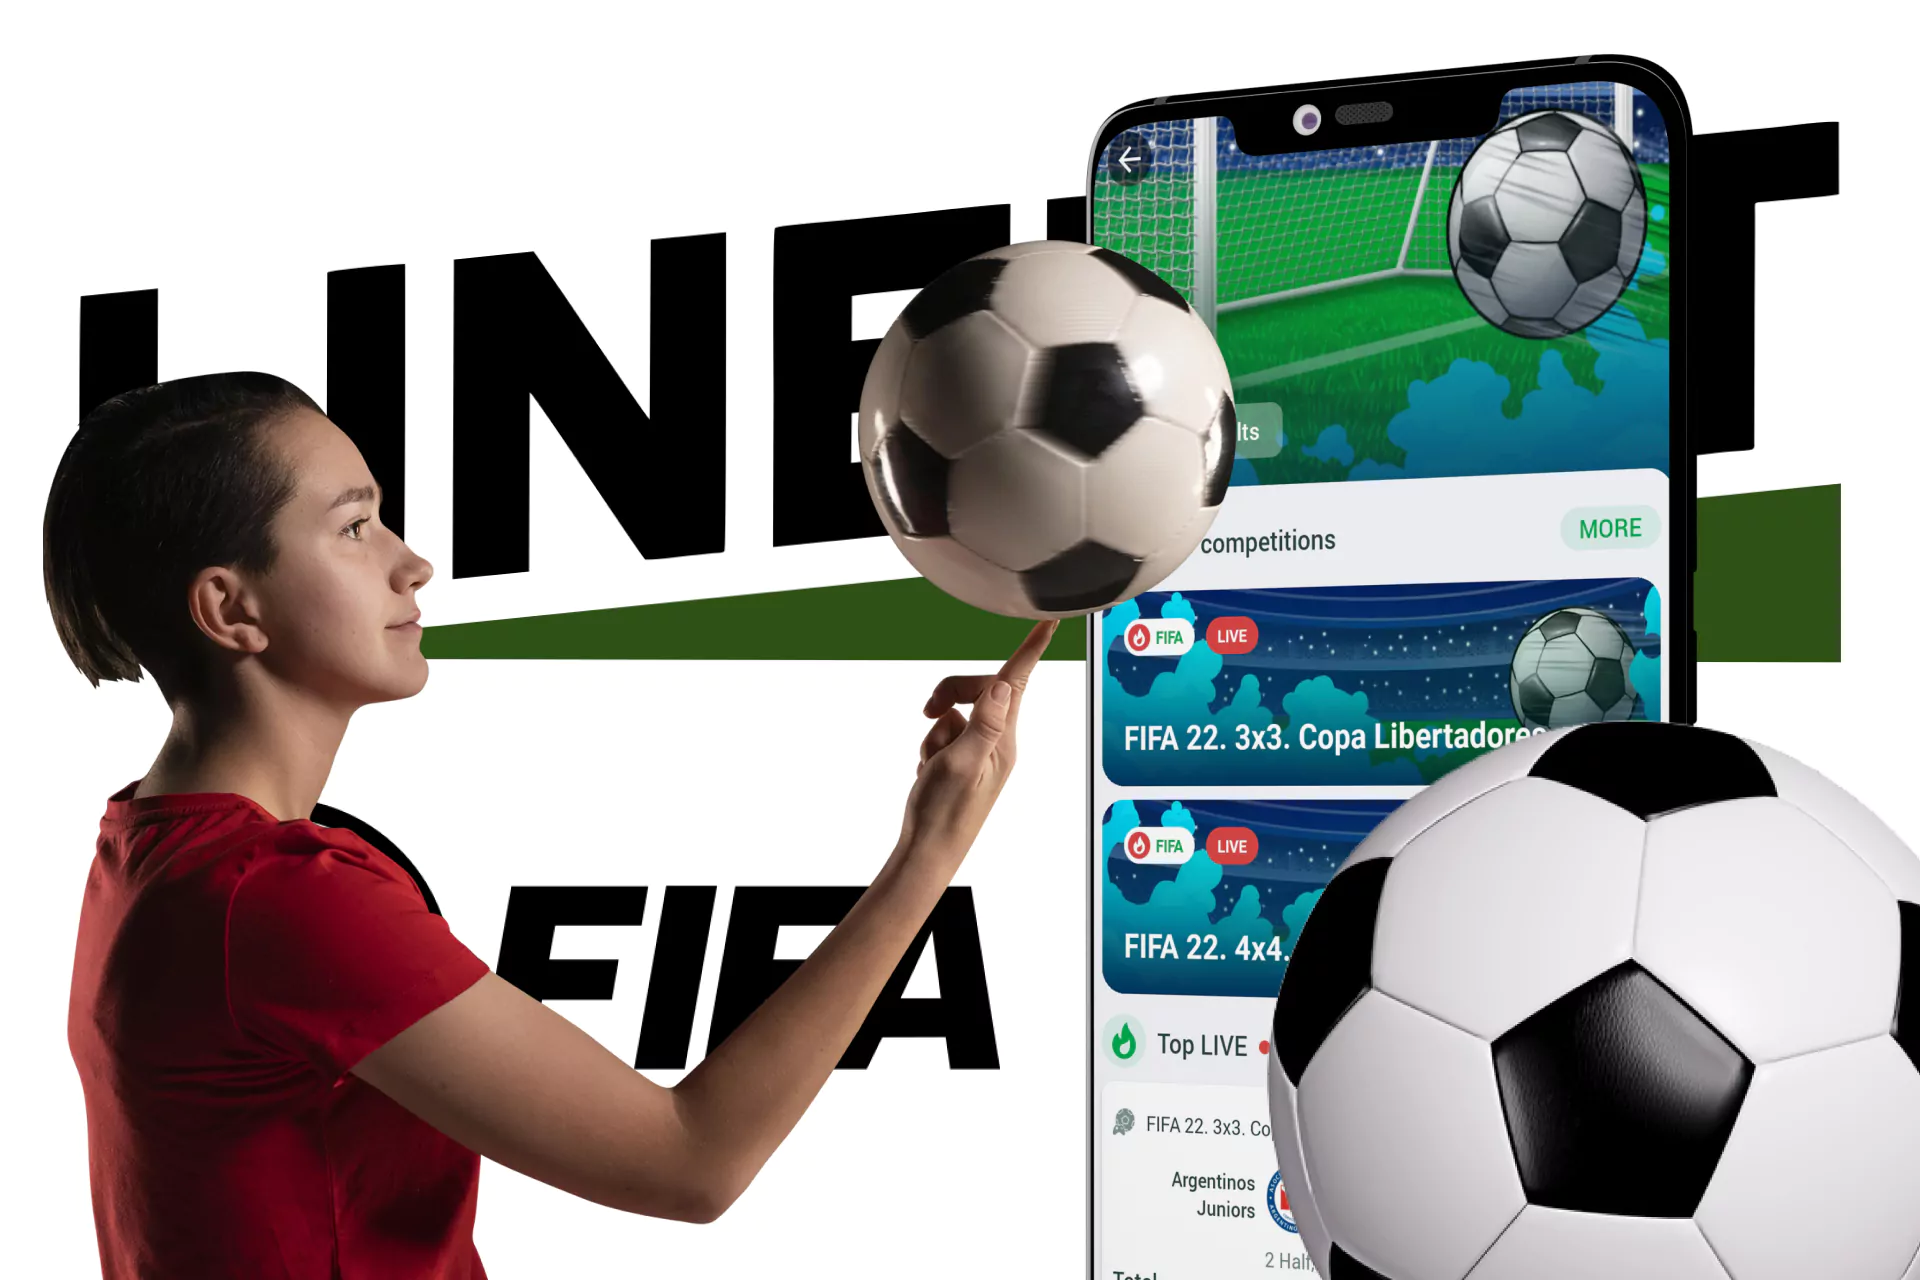 Use your smartphone to bet on Fifa at Linebet.